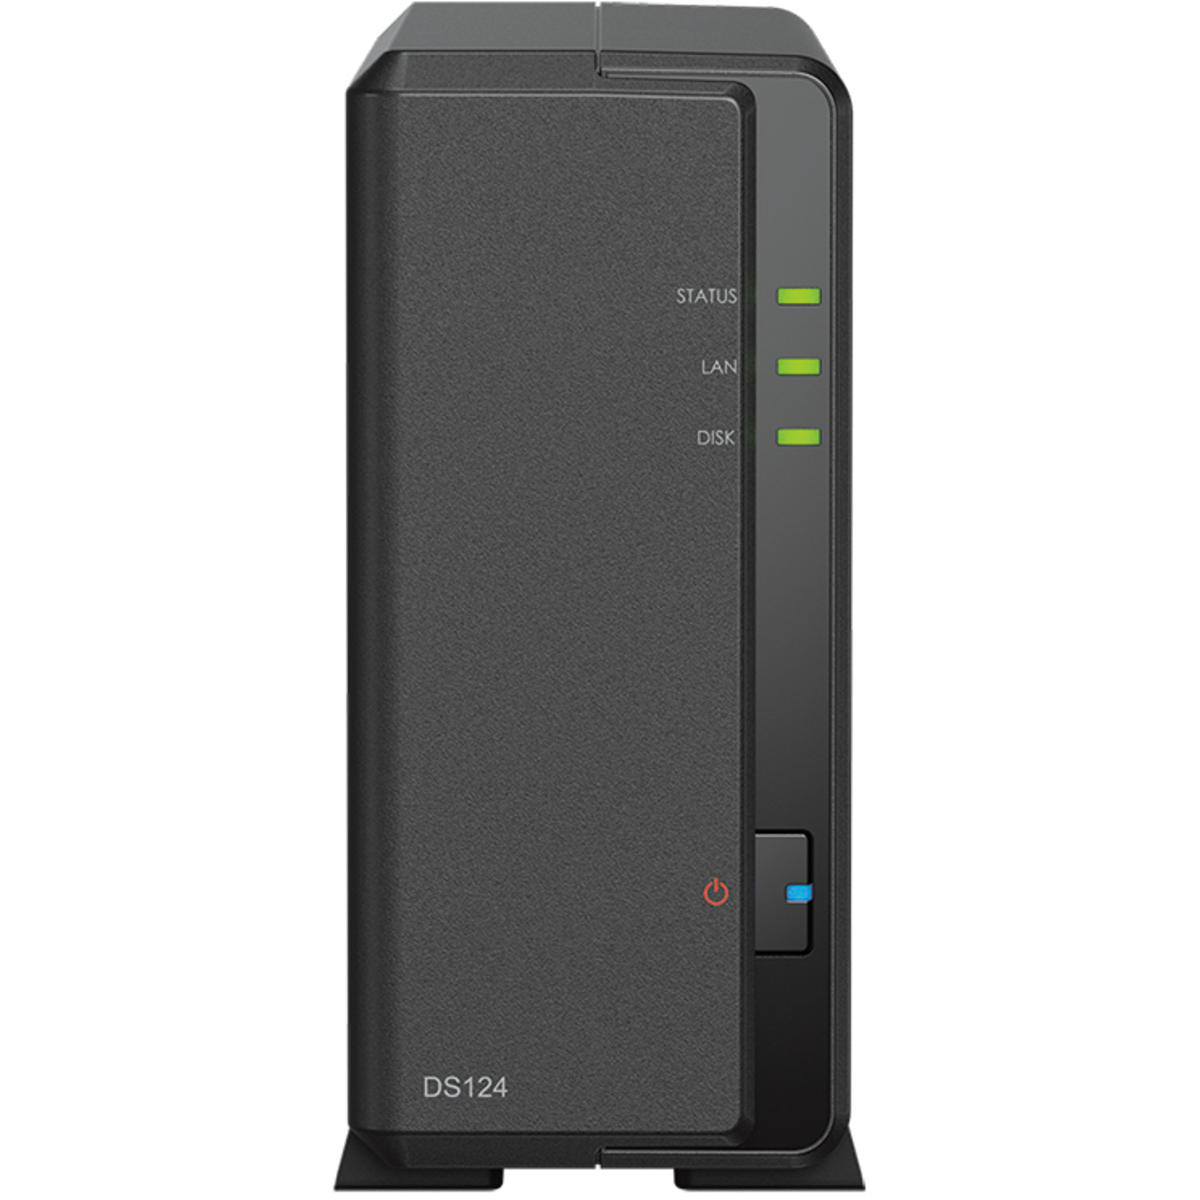 Synology DiskStation DS124 4tb 1-Bay Desktop Personal / Basic Home / Small Office NAS - Network Attached Storage Device 1x4tb Toshiba MN Series MN08ADA400E 3.5 7200rpm SATA 6Gb/s HDD NAS Class Drives Installed - Burn-In Tested - ON SALE DiskStation DS124